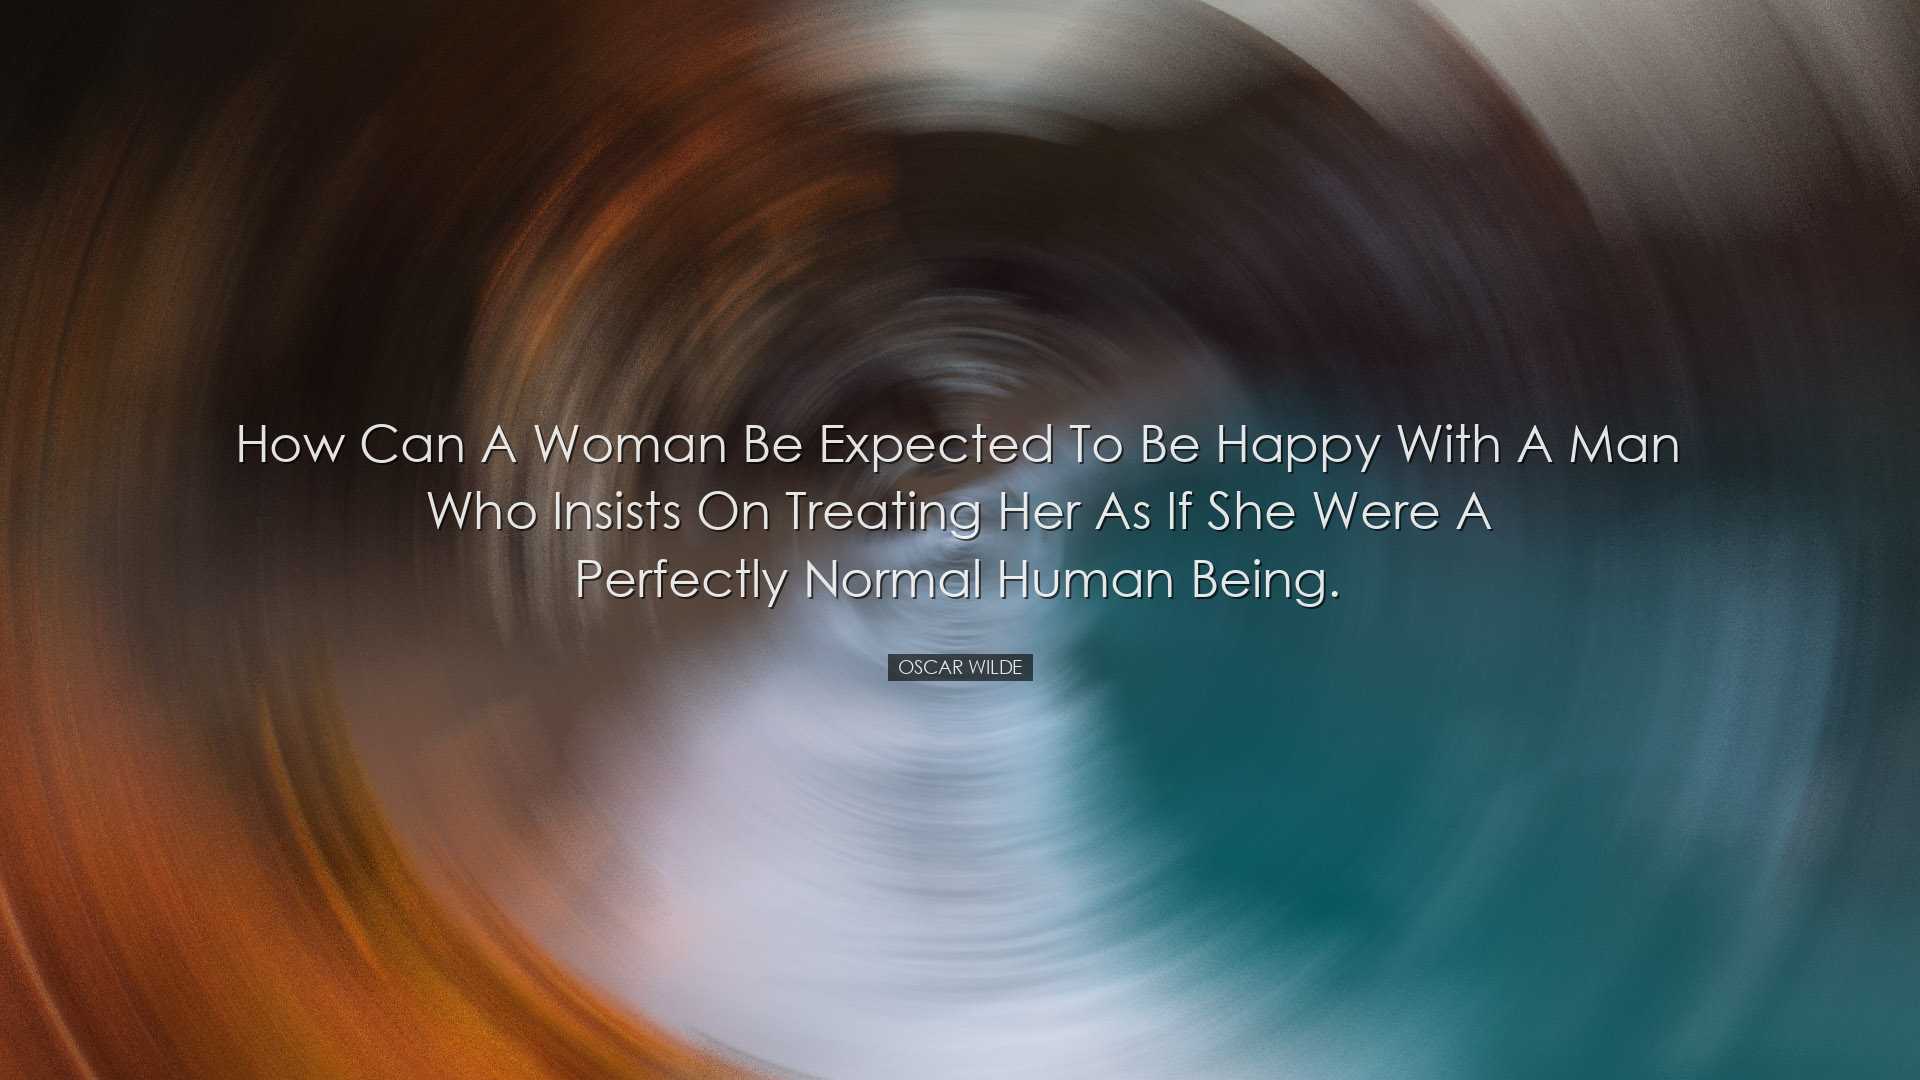 How can a woman be expected to be happy with a man who insists on